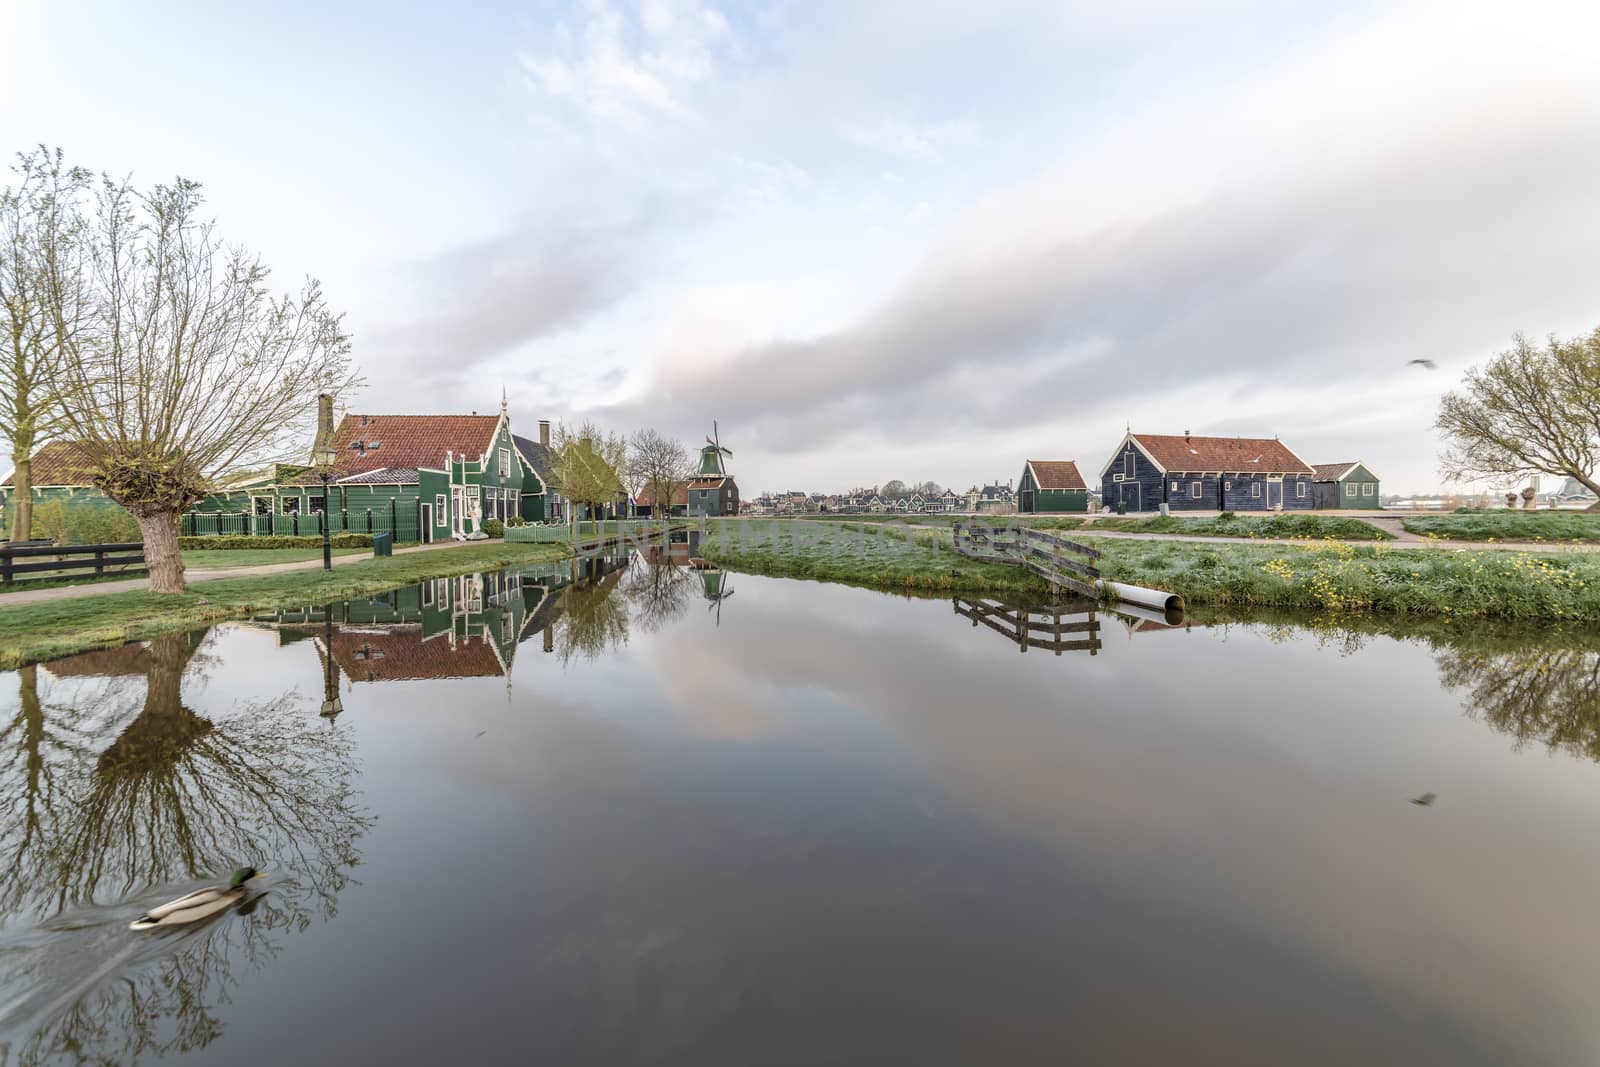 ZAANSE SCHANS, 14 April 2019 - Reflection of the wooden green houses topped with dark orange color roof reflected on the calm water of the canal